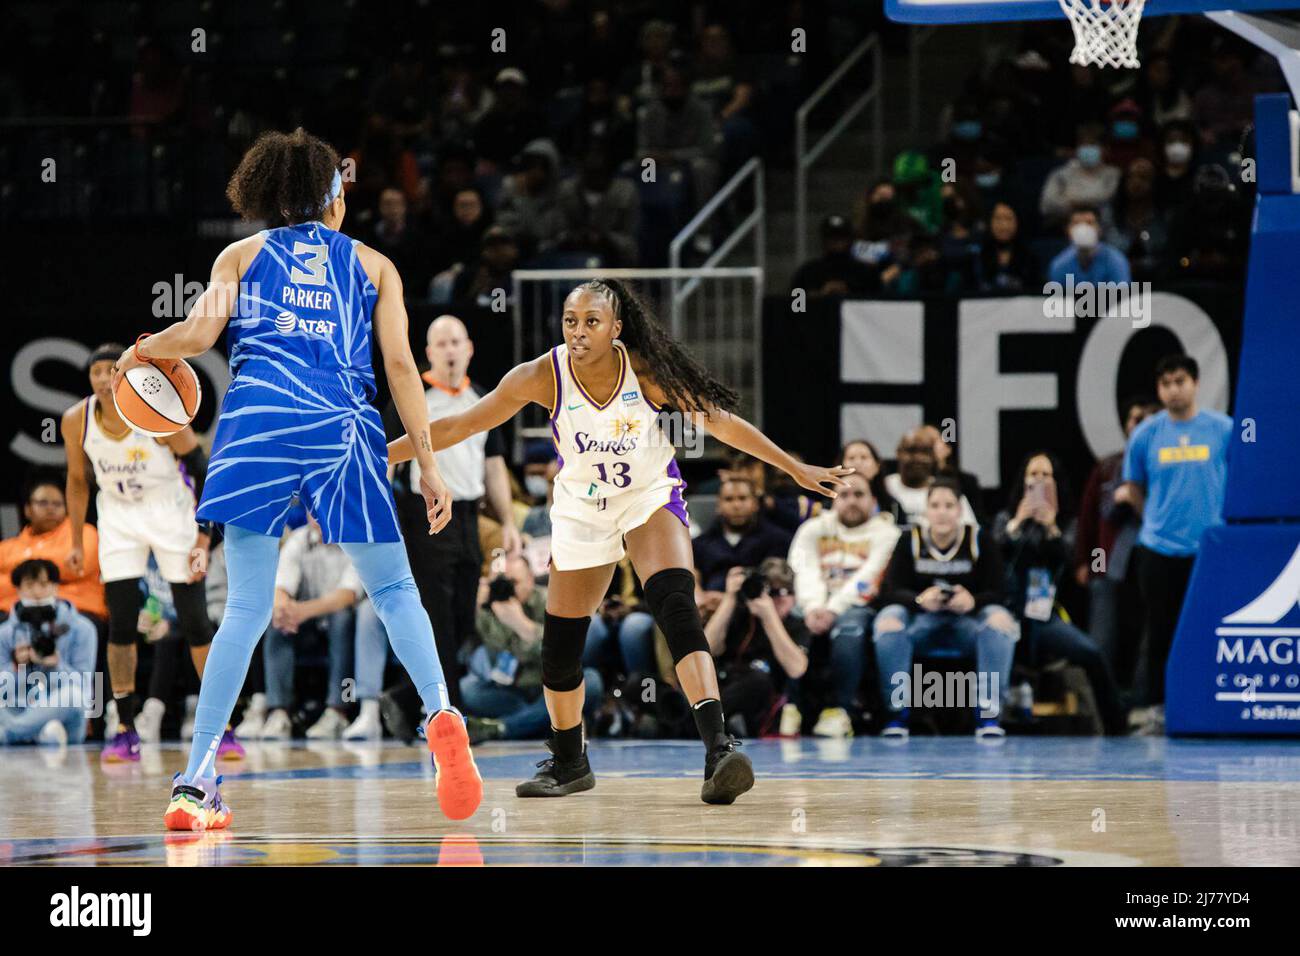 Chiney Ogwumike 13 Los Angeles Sparks Guards Candace Parker 3 Chicago Sky During The Wnba 